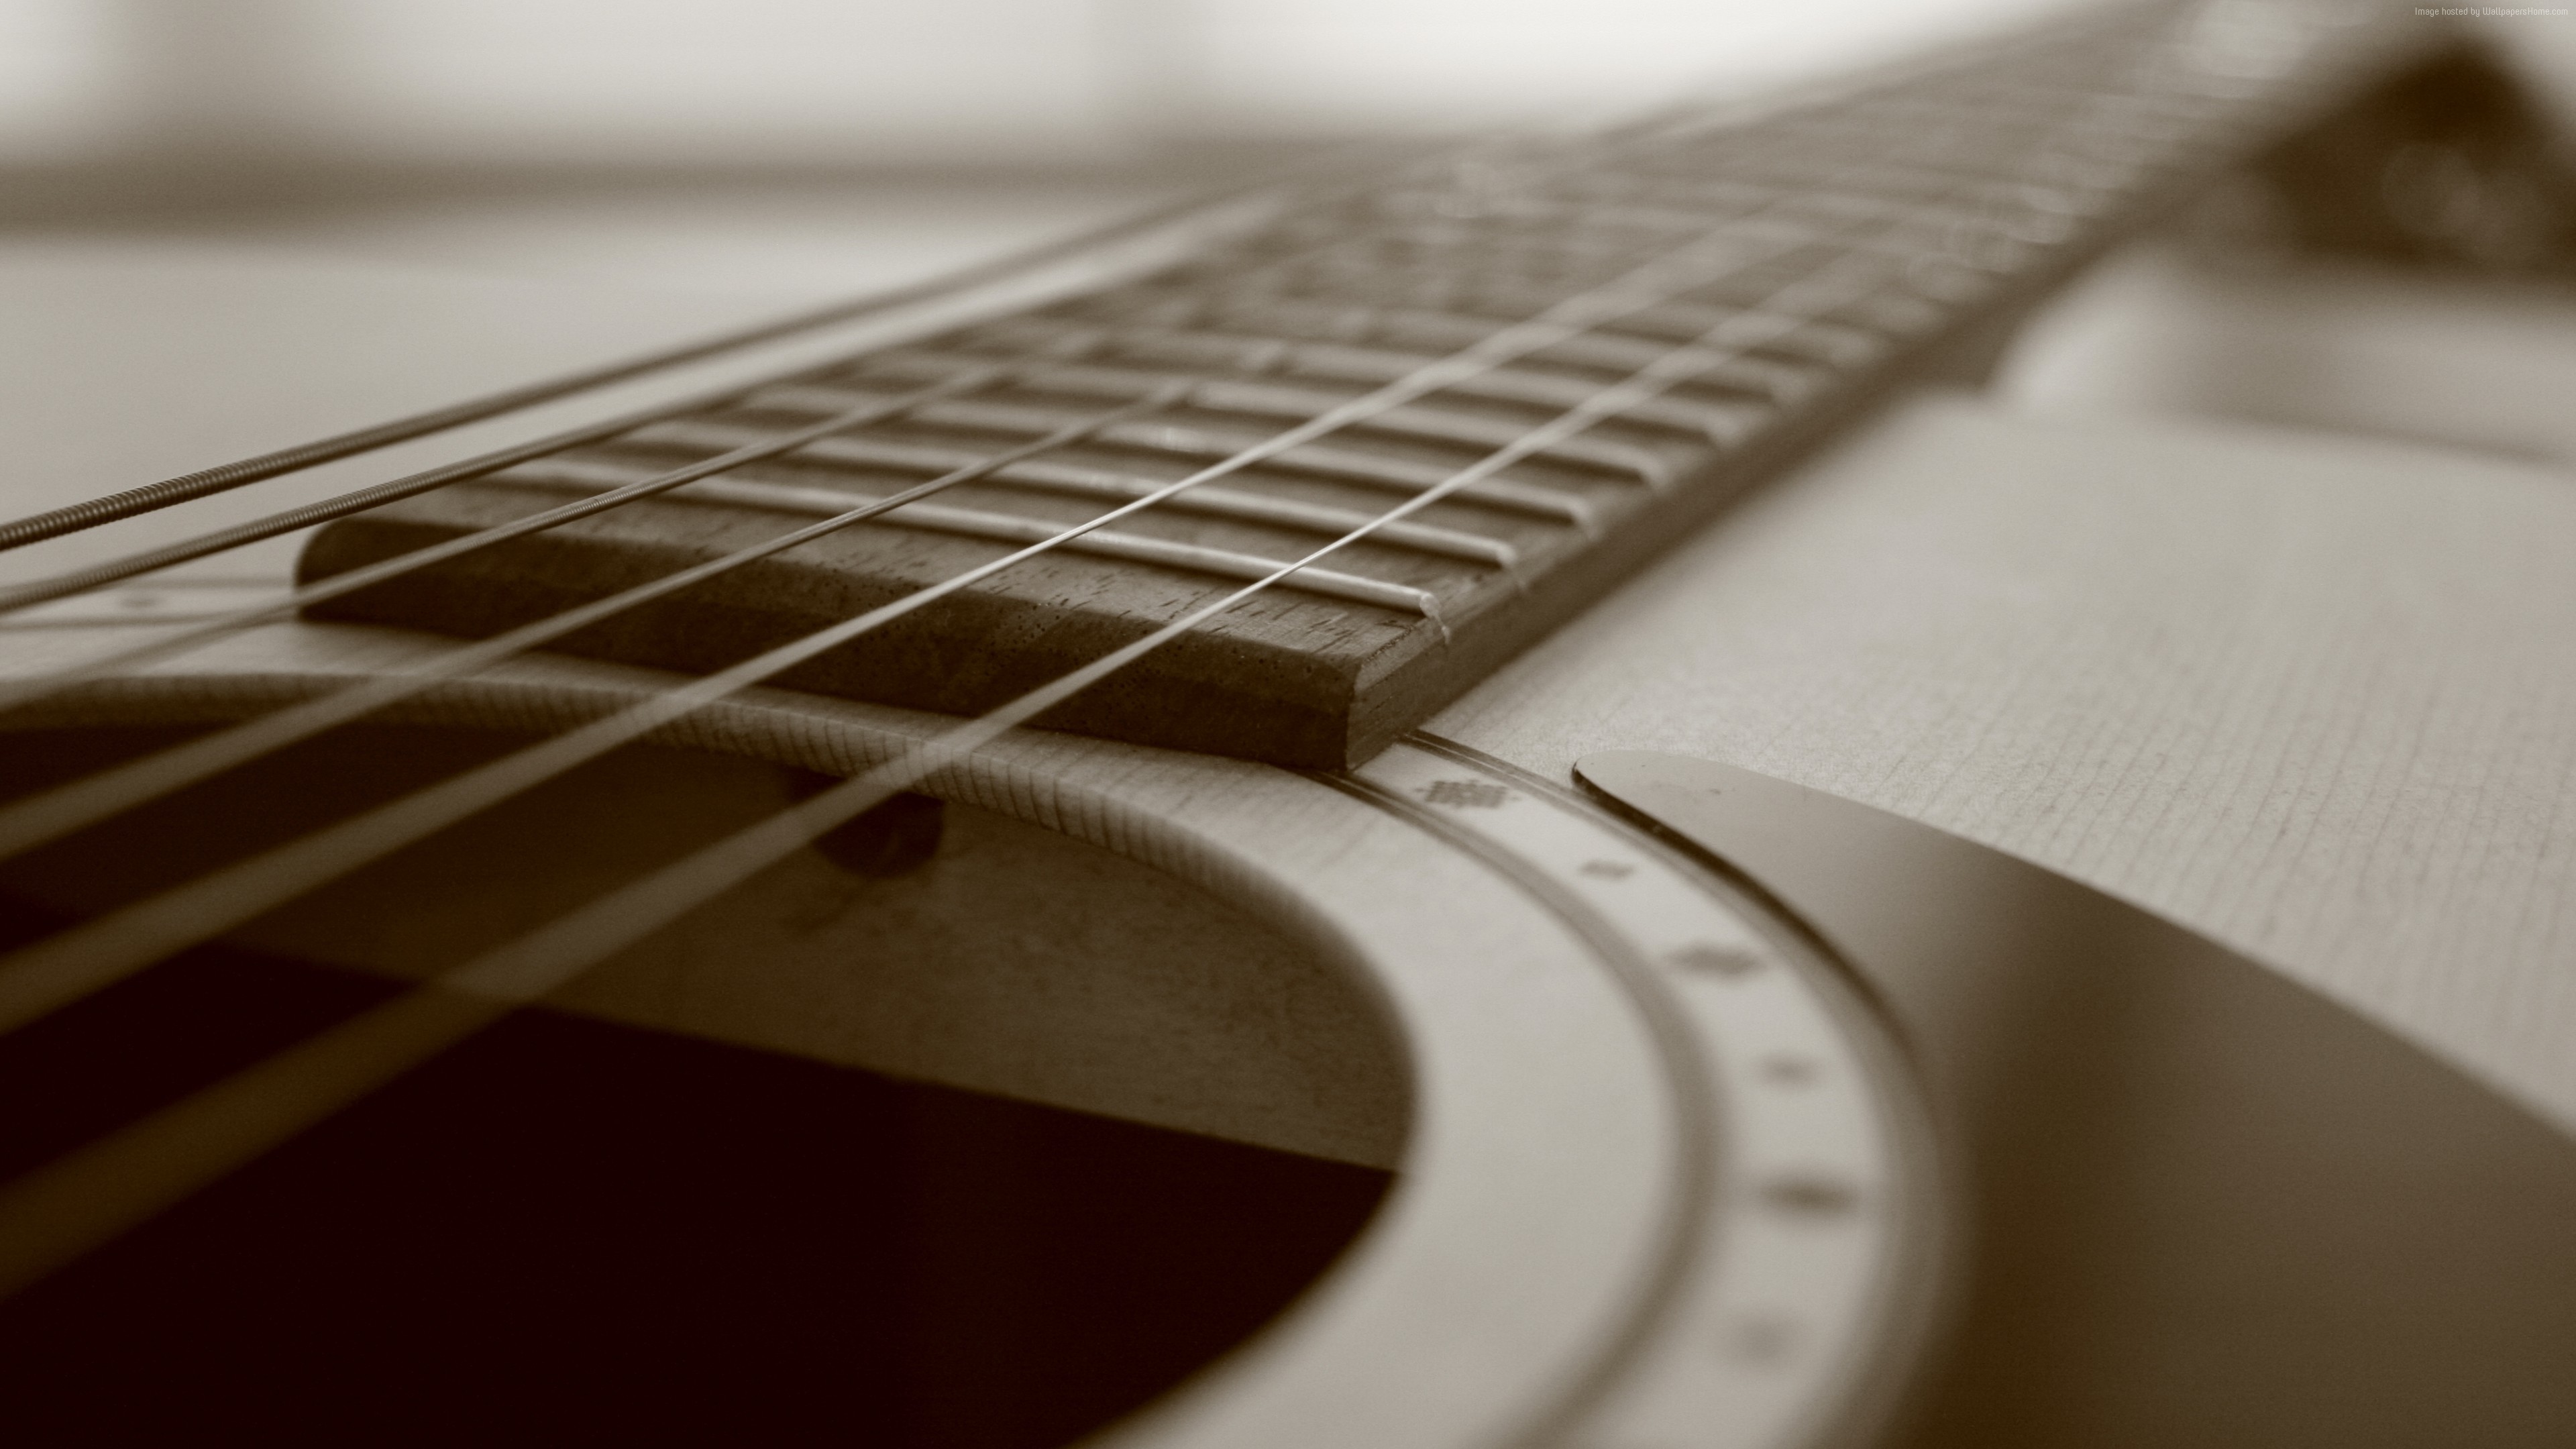 3840x2160, Acoustic Guitar Wallpaper Widescreen - Android Wallpaper Acoustic Guitar - HD Wallpaper 